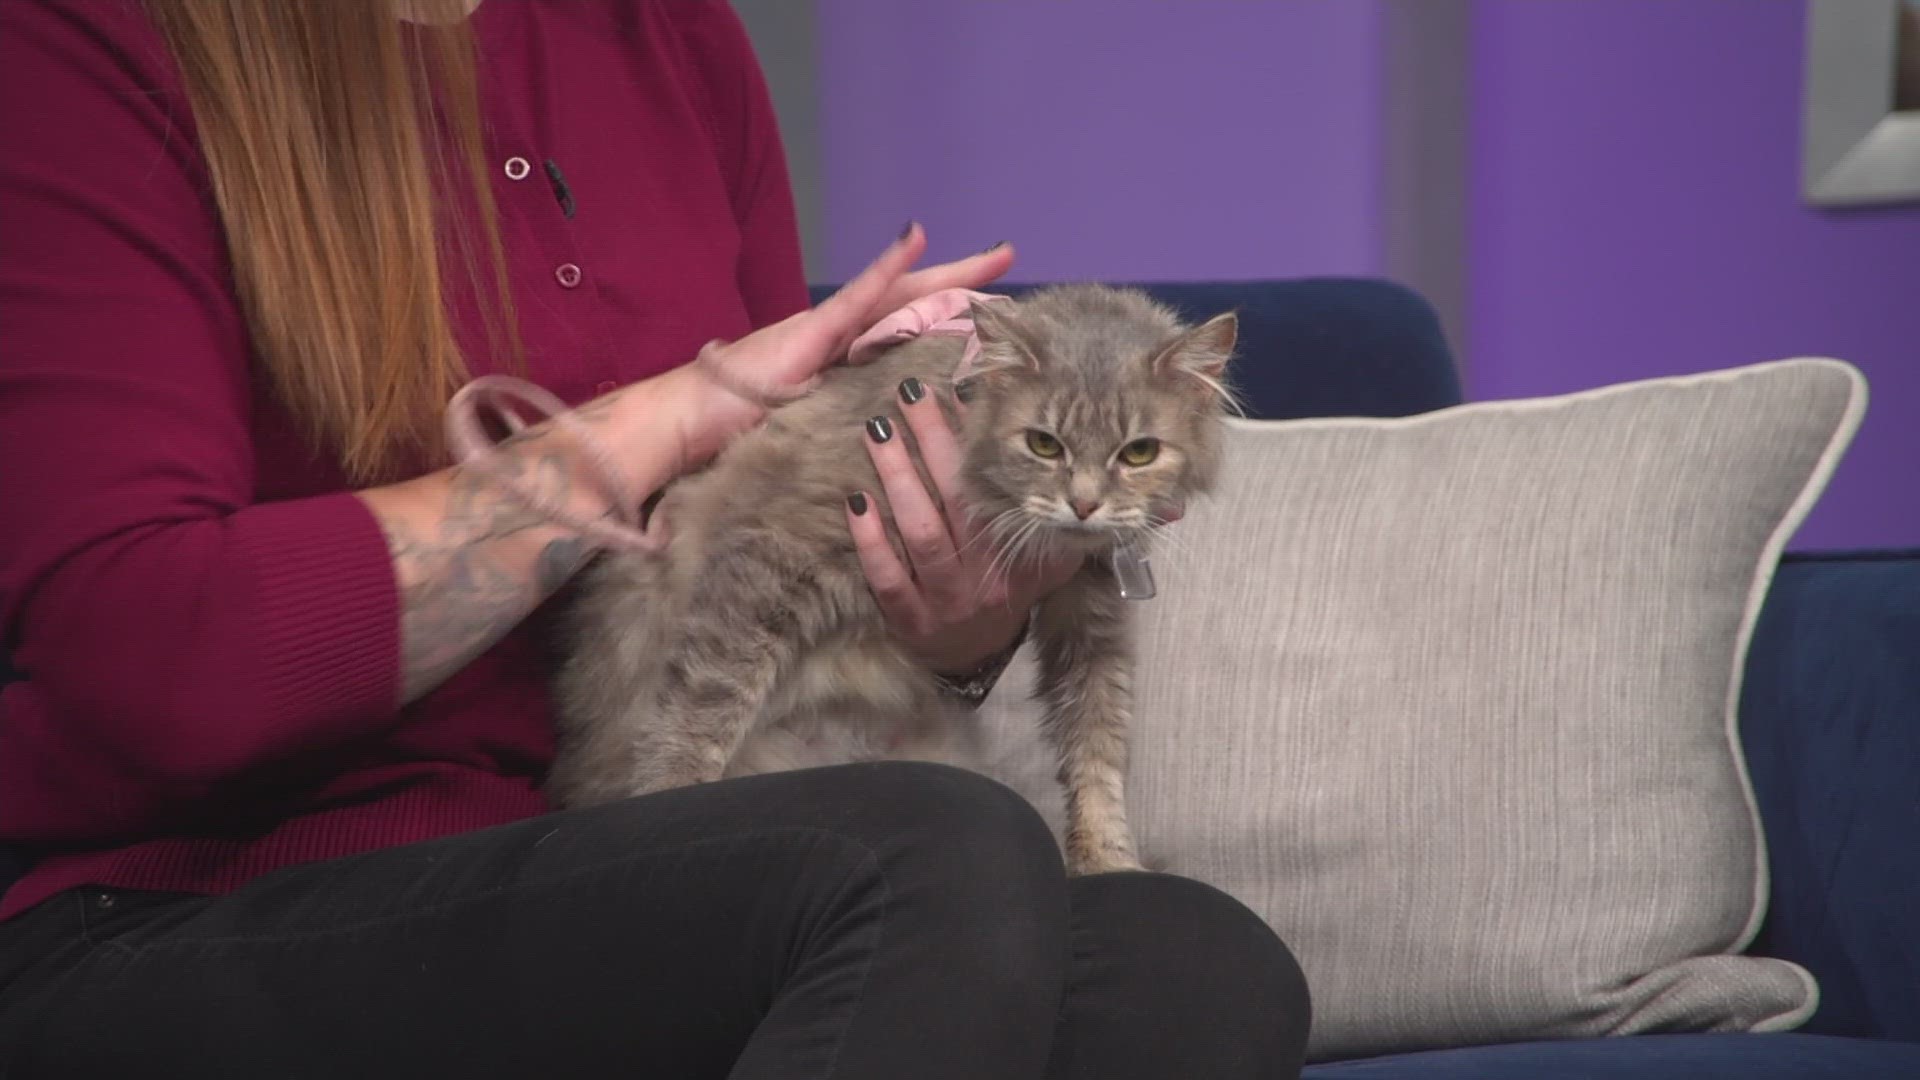 Eloise is an 8-year-old cat available for adoption from the Cat Care Society in Lakewood.